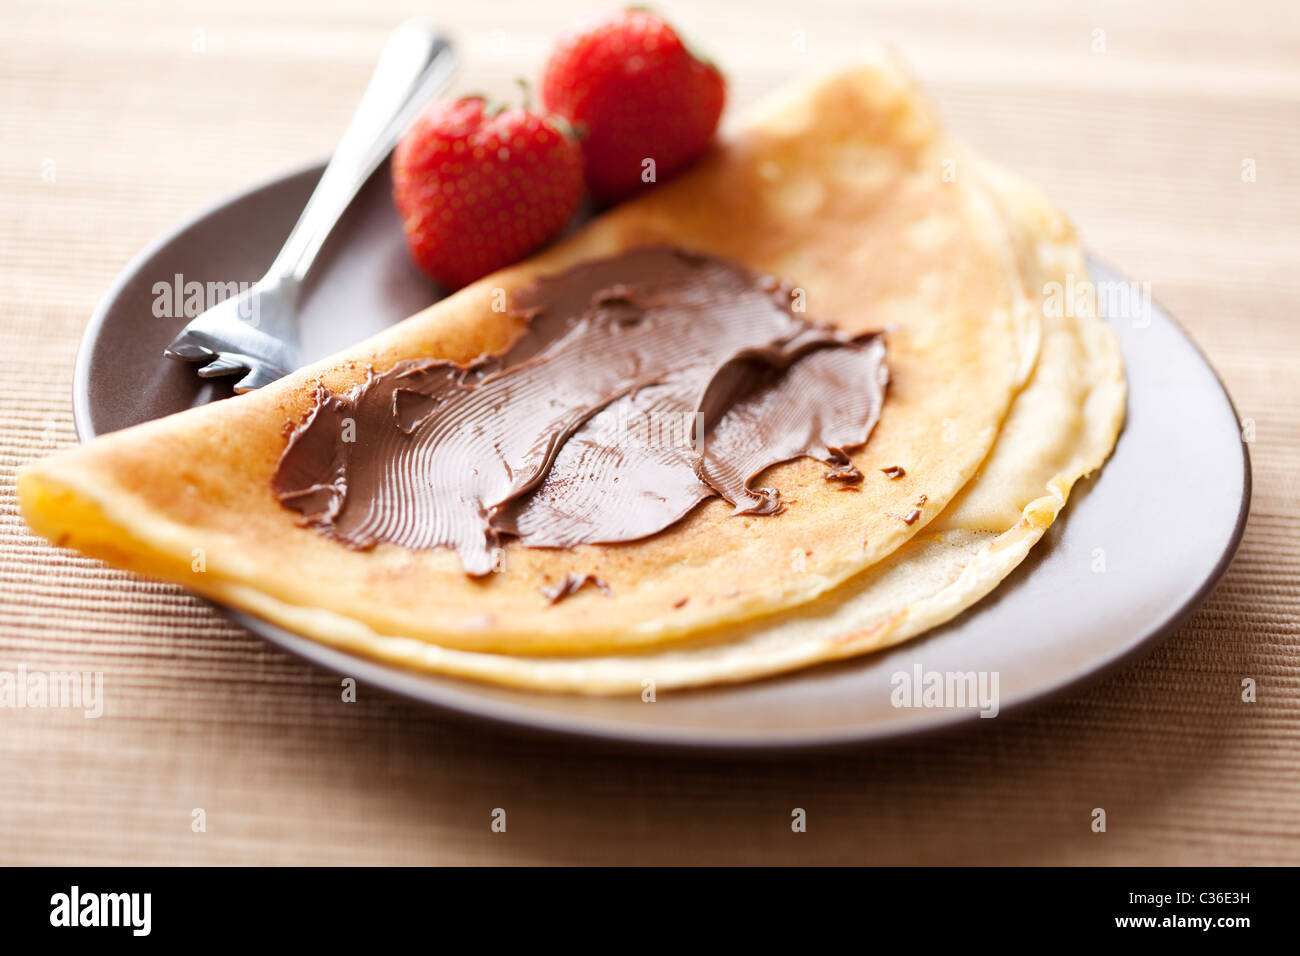 crepe with chocolate spread and strawberries Stock Photo